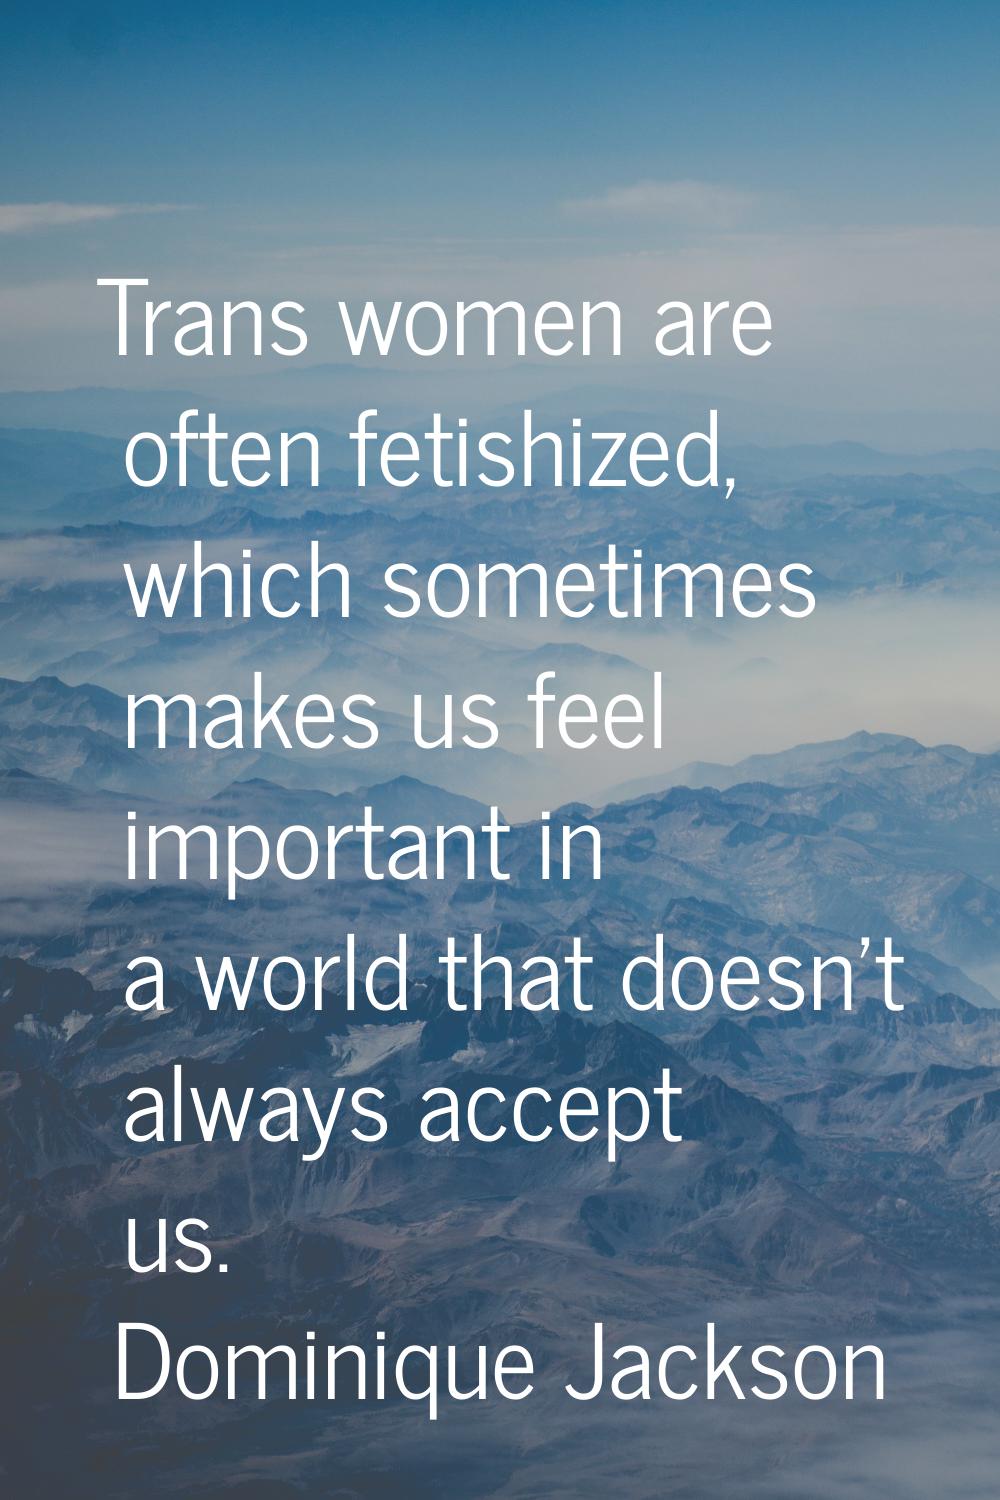 Trans women are often fetishized, which sometimes makes us feel important in a world that doesn't a